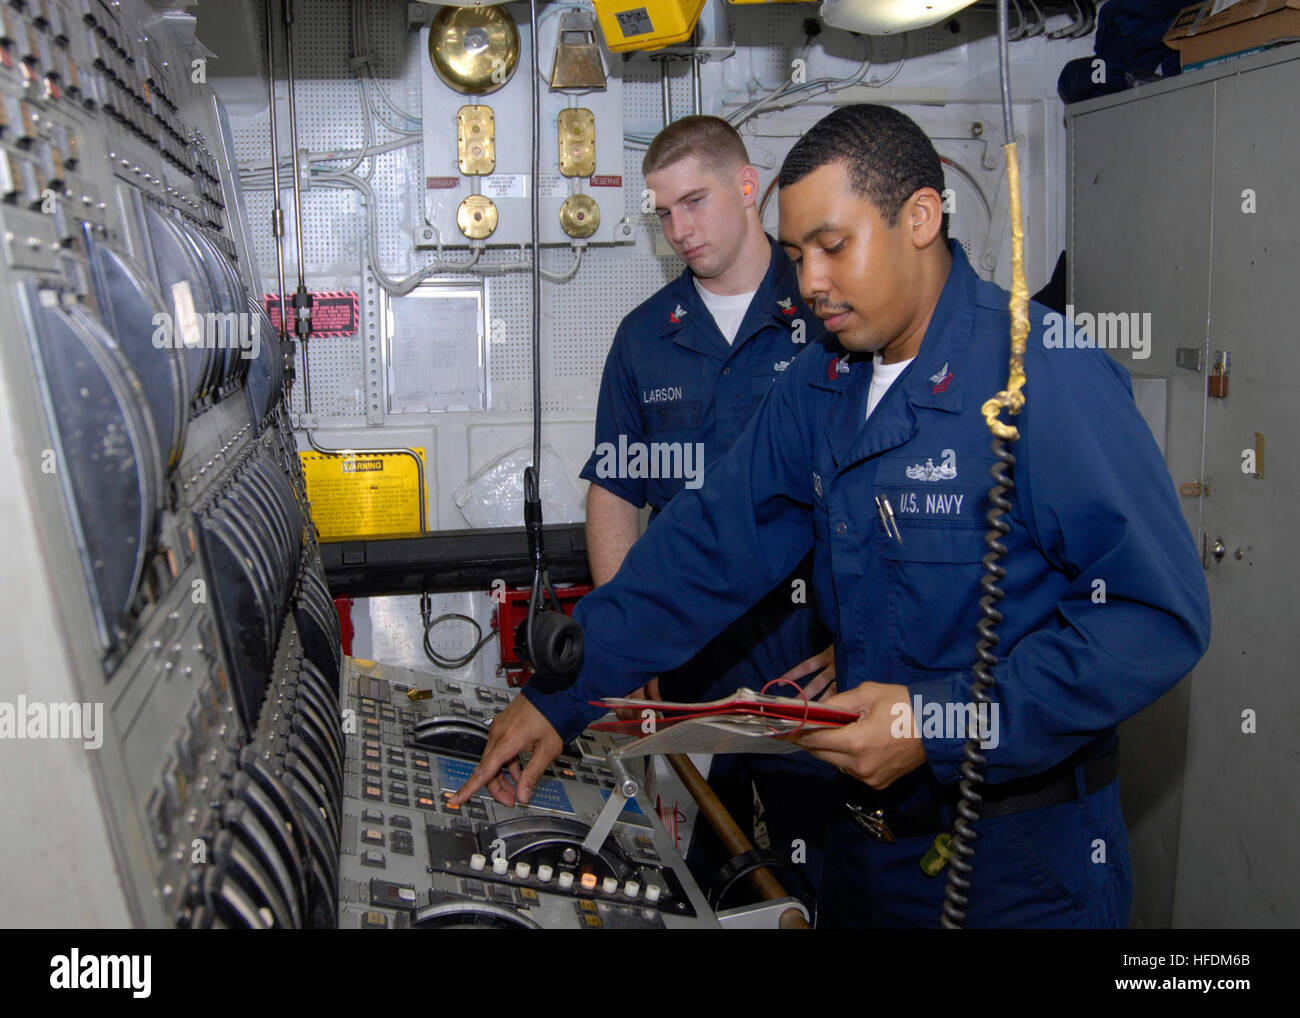 Petty Officer 1st Class Daniel Citizen, an engineman, from Lafayette, La., front, and Petty Officer 2nd Class David Larson, also an engineman, from Bigelow, Ark., prepare the main machinery room number 2 operating station for an operational test of the ship's number 2 bravo diesel engine aboard the amphibious dock landing ship USS Fort McHenry. Fort McHenry is participating in Operation Unified Response after a 7.0 magnitude earthquake caused severe damage in and around Port-a-Prince, Haiti Jan. 12. (Photo by: Petty Officer 1st Class Edward Kessler) An operational test 254872 Stock Photo